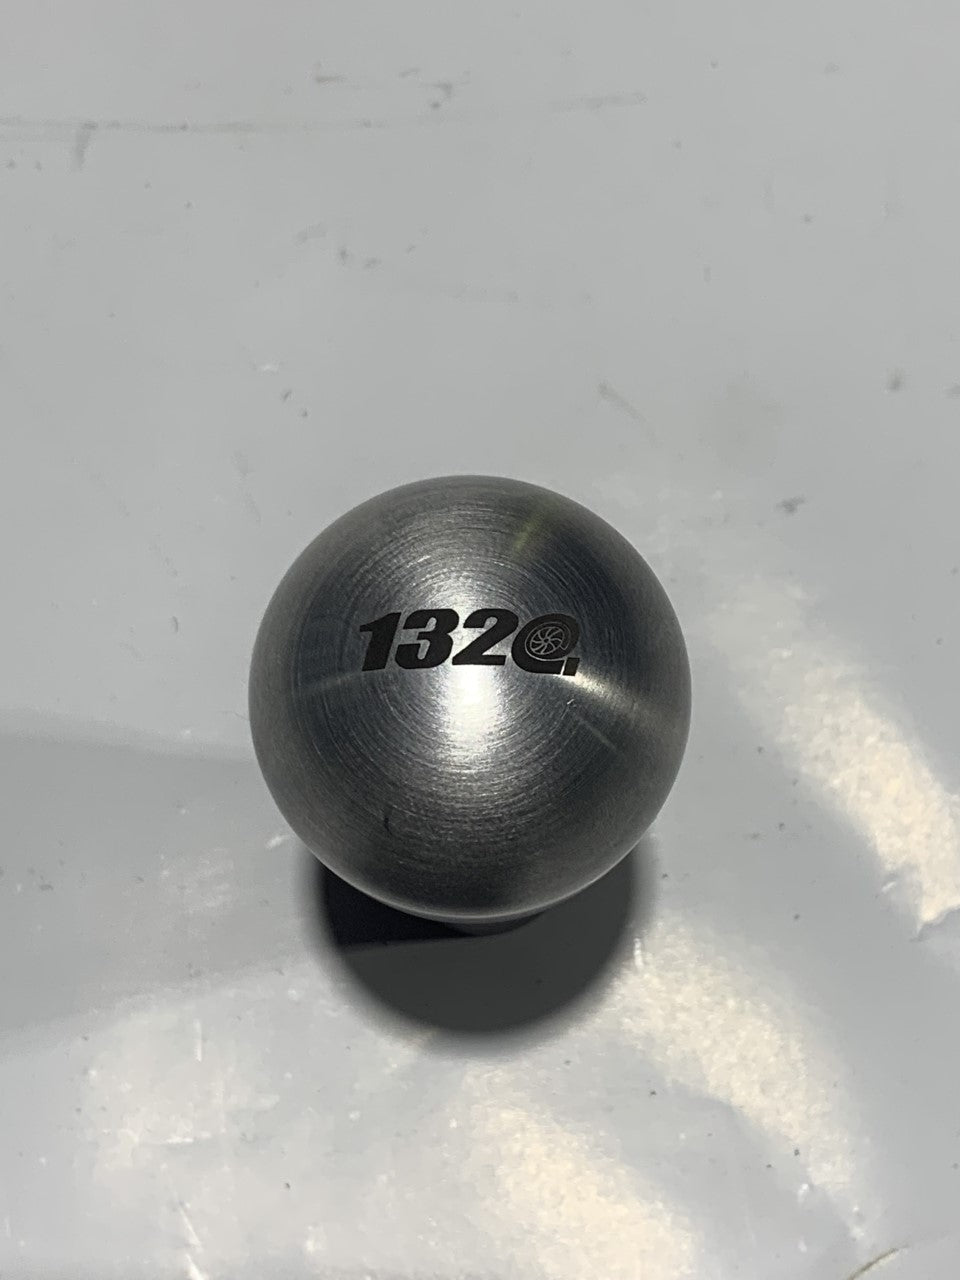 New - 1320 Performance Billet Stainless Shift Knob - 12 x 1.25